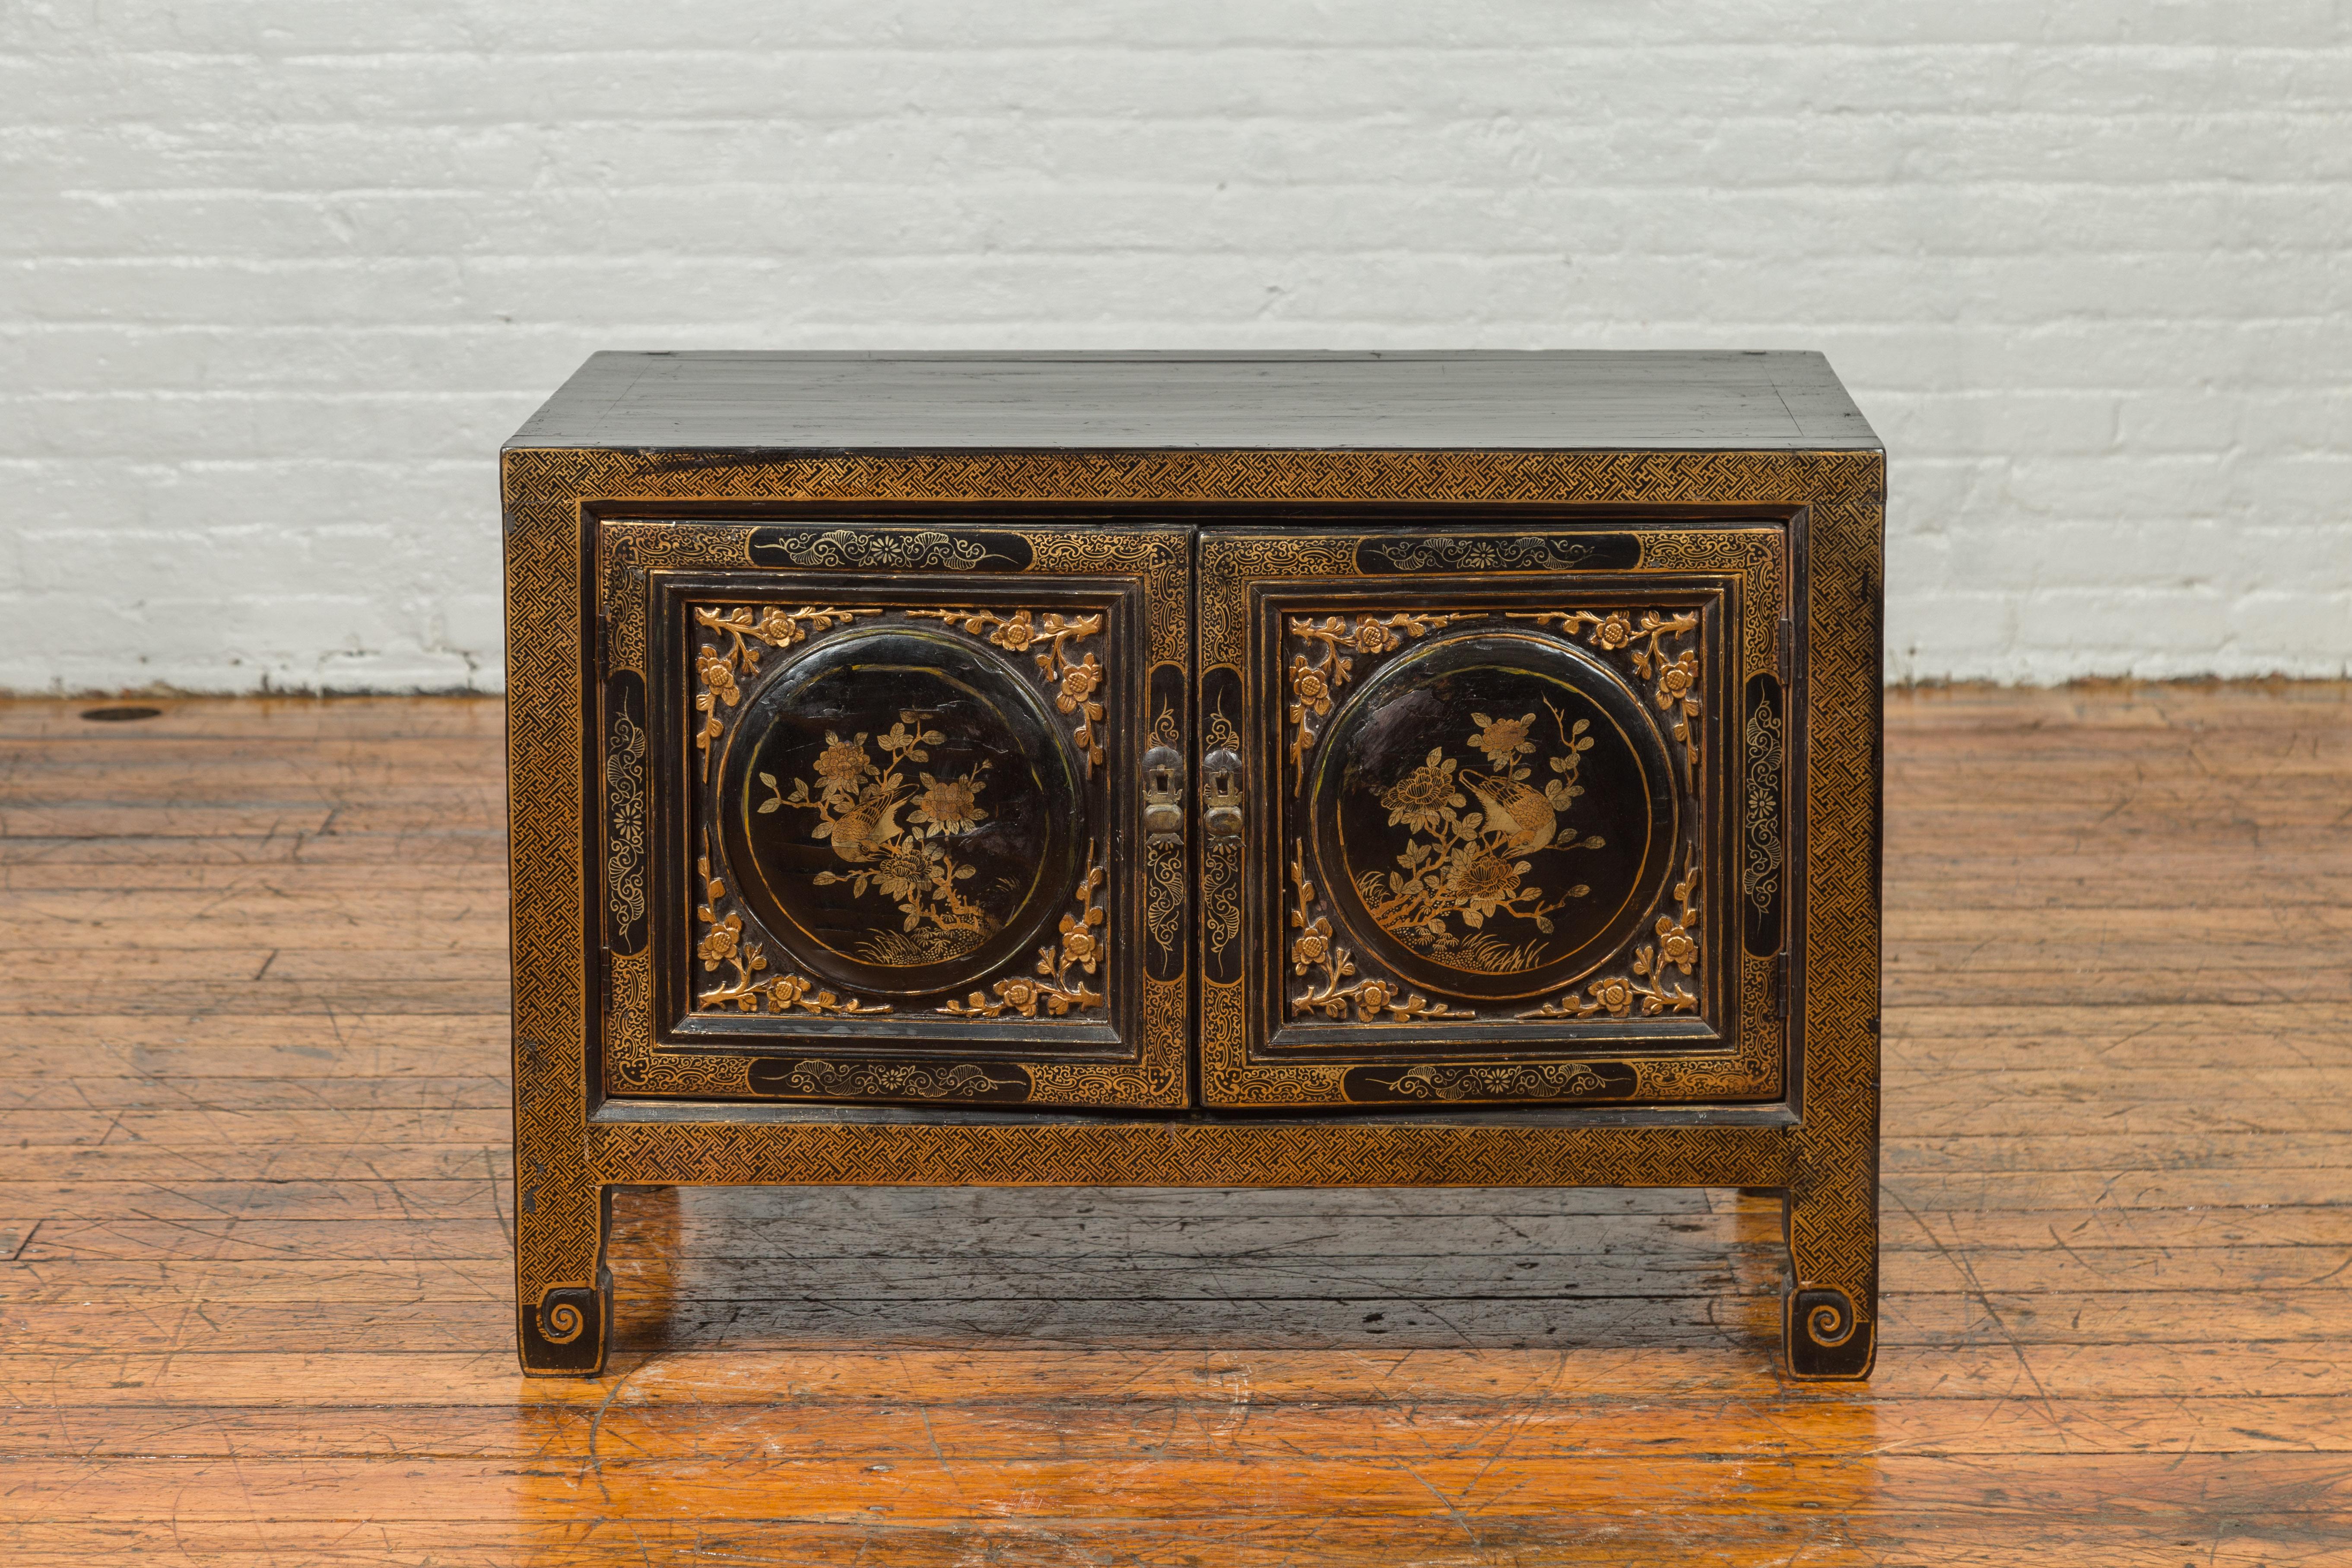 A Chinese antique black and gold lacquer cabinet from the 19th century, with floral and bird décor. Is it the exquisite contrast of colors between the gold and black tones or the delicacy of the motifs that immediately attracts our eyes? A simple